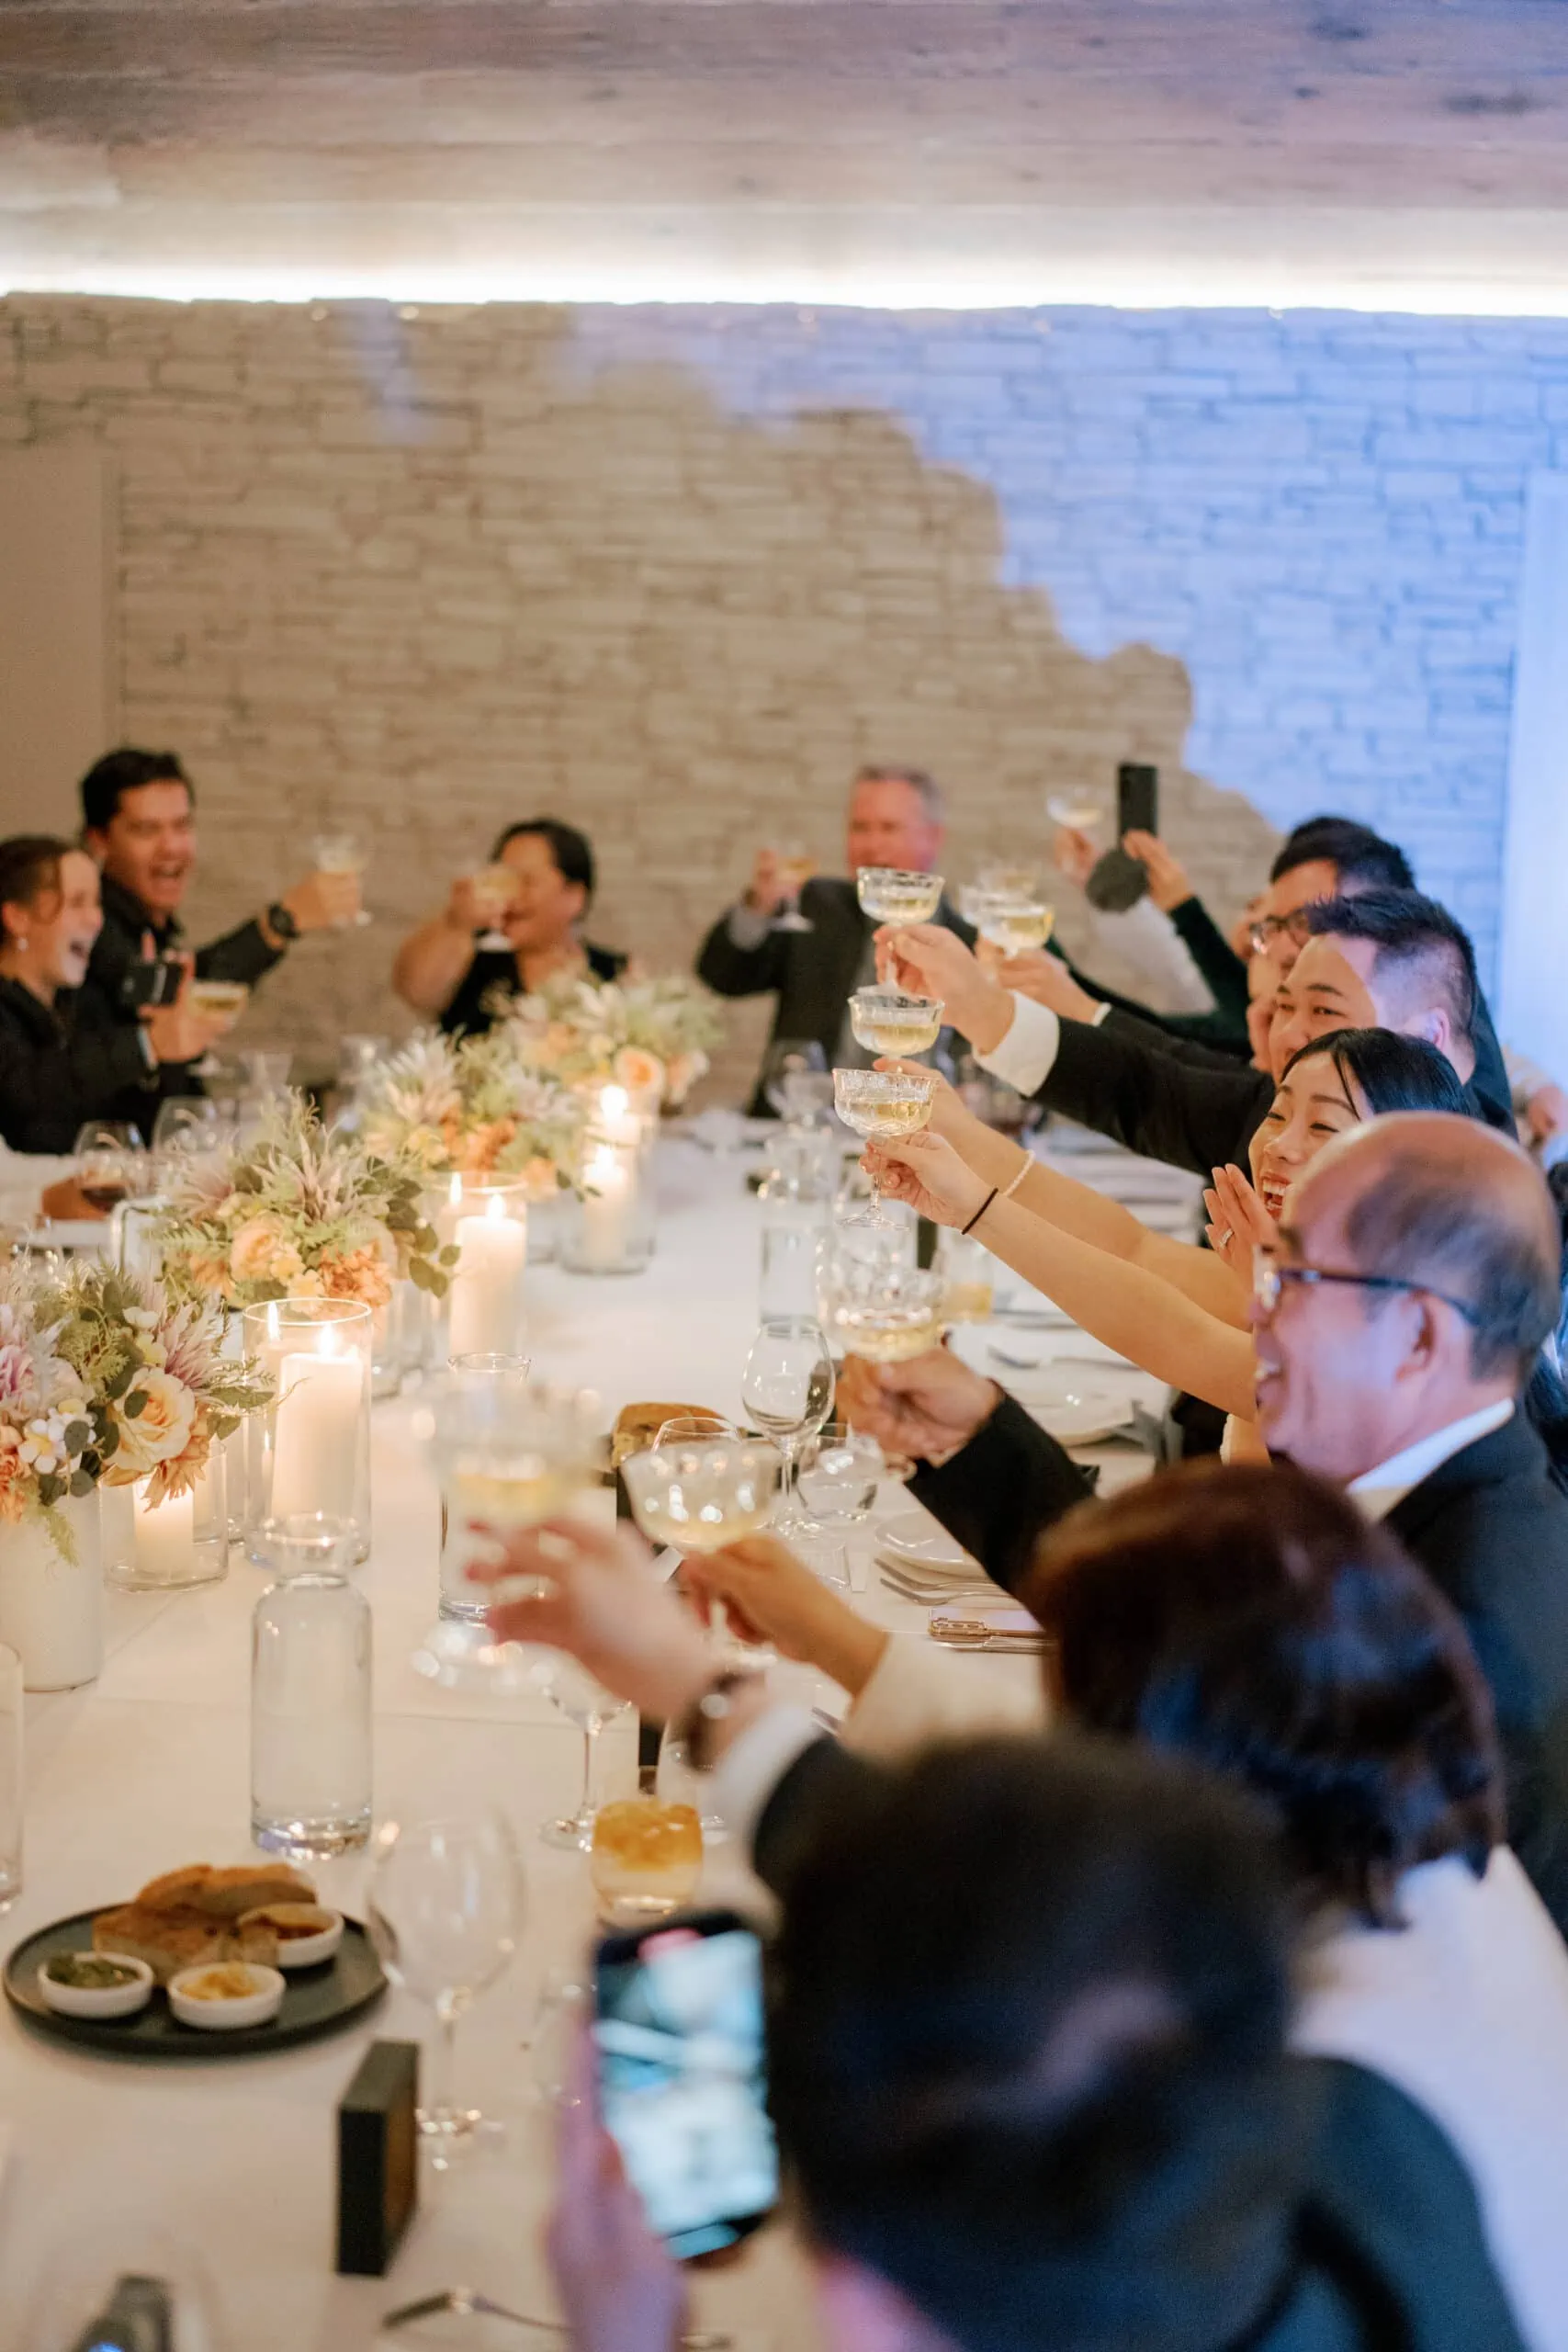 Queenstown New Zealand Elopement Wedding Photographer - A group of people toasting at a Lam and Wendy's Kamana Lakehouse wedding dinner table.